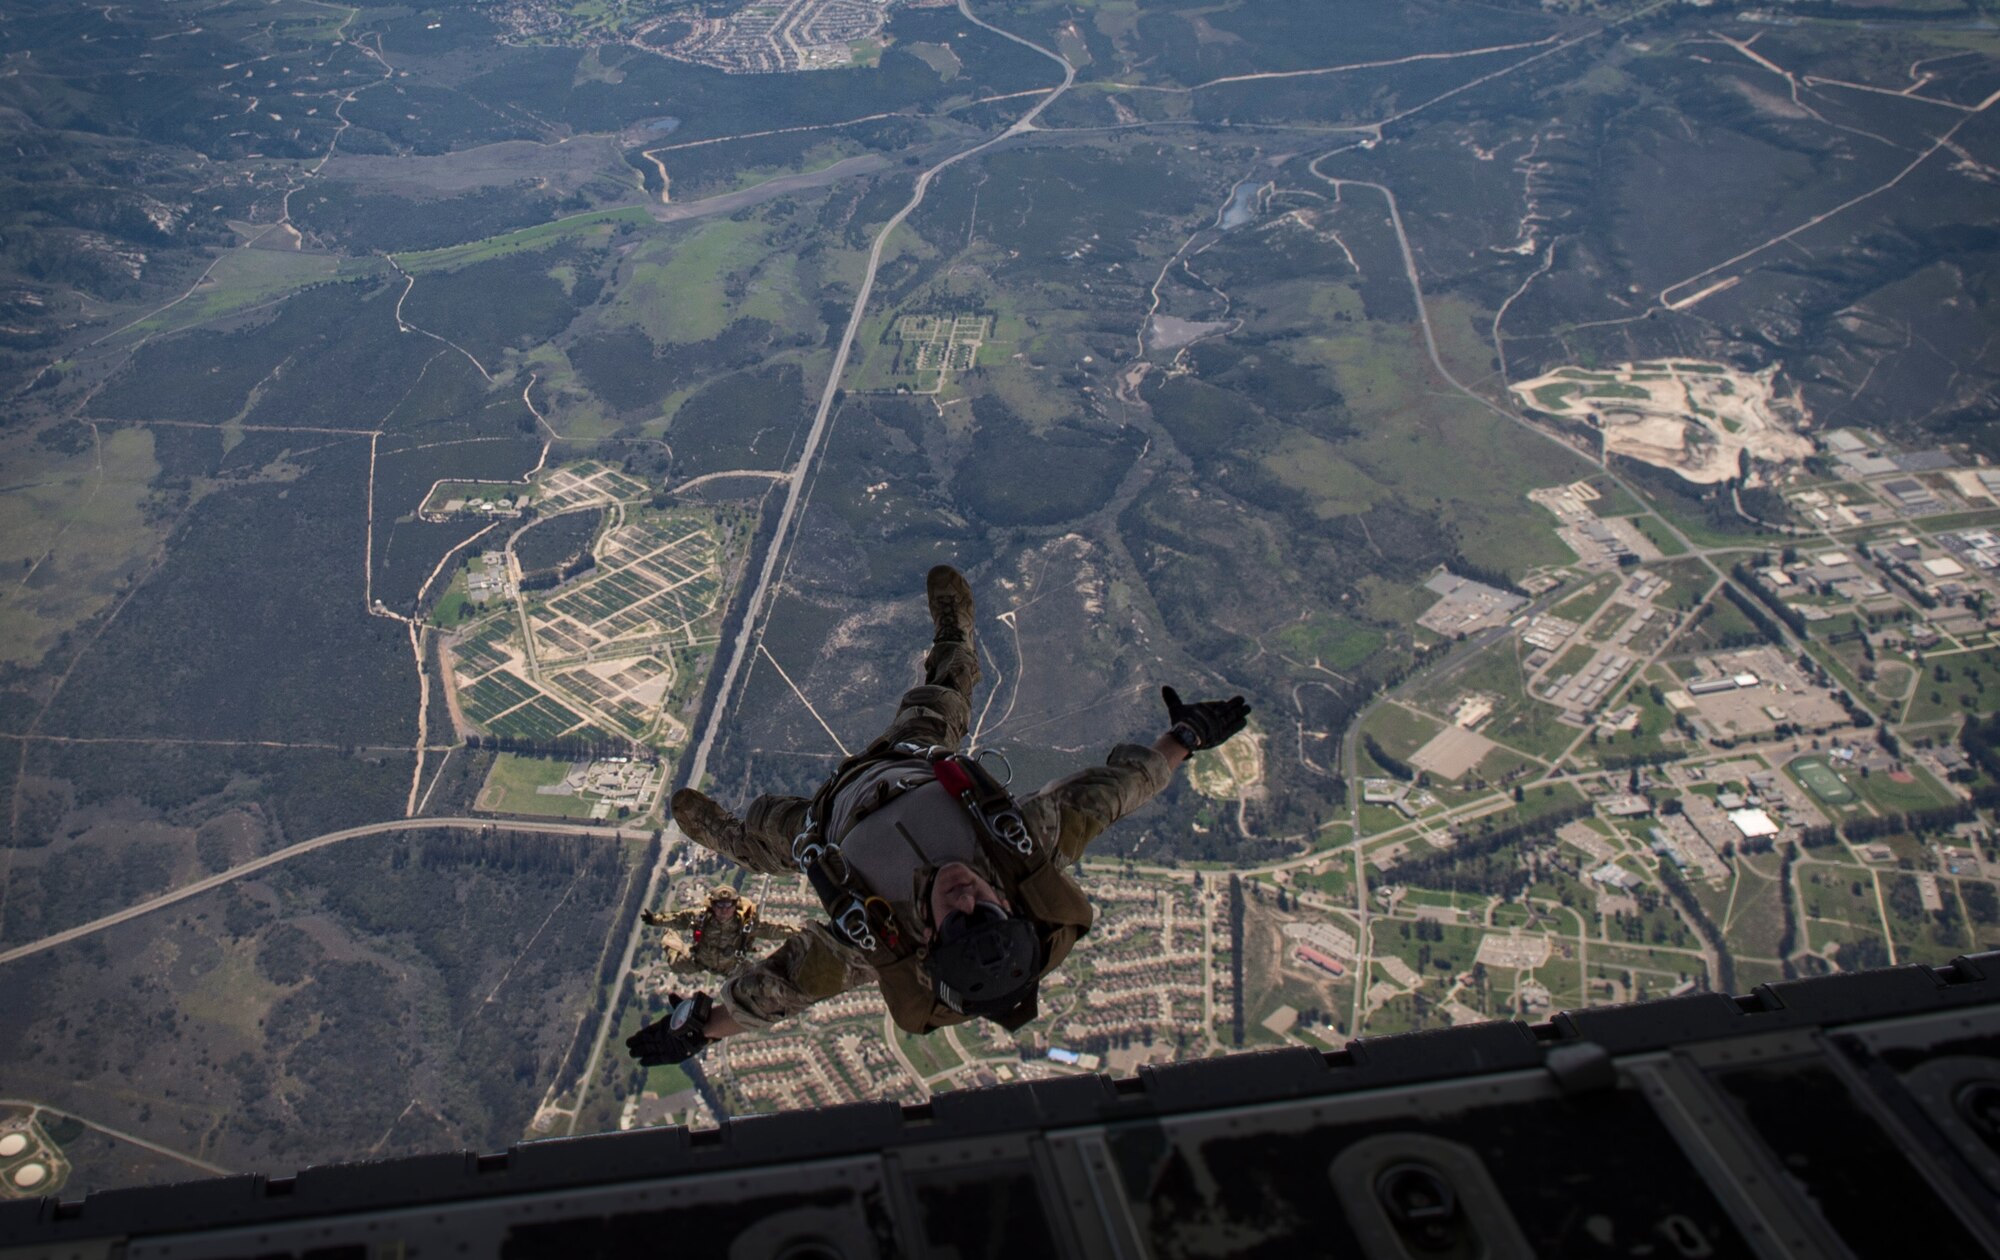 Pararescuemen from the 58th Rescue Squadron, Nellis Air Force Base, Nev., descend onto a drop zone during Tiger Rescue IV, March 30, 2018, at Vandenberg Air Force Base, Calif. The four-day exercise challenged Airmen from multiple rescue squadrons to bring the capabilities of the personnel recovery triad together to successfully complete rescue missions and maintain proficiency. The three branches of the personnel recovery triad are the HC-130J Combat King II, HH-60G Pave Hawk and the guardian angel weapons system or pararescuemen. (U.S. Air Force photo by Senior Airman Janiqua P. Robinson)